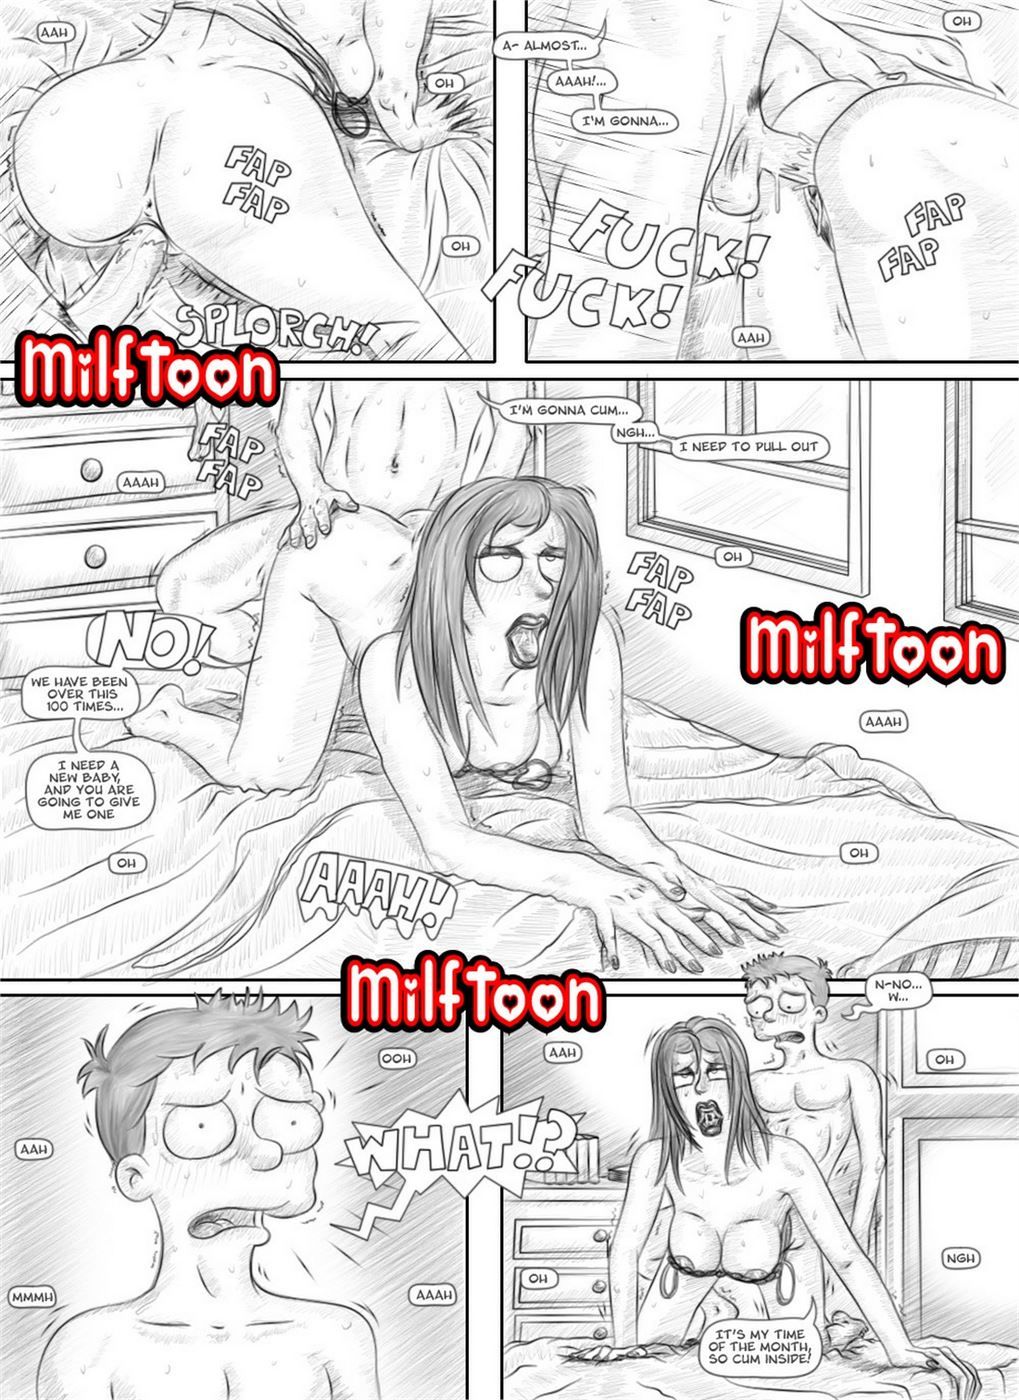 Simpsons - So big and hard,Milftoon page 9